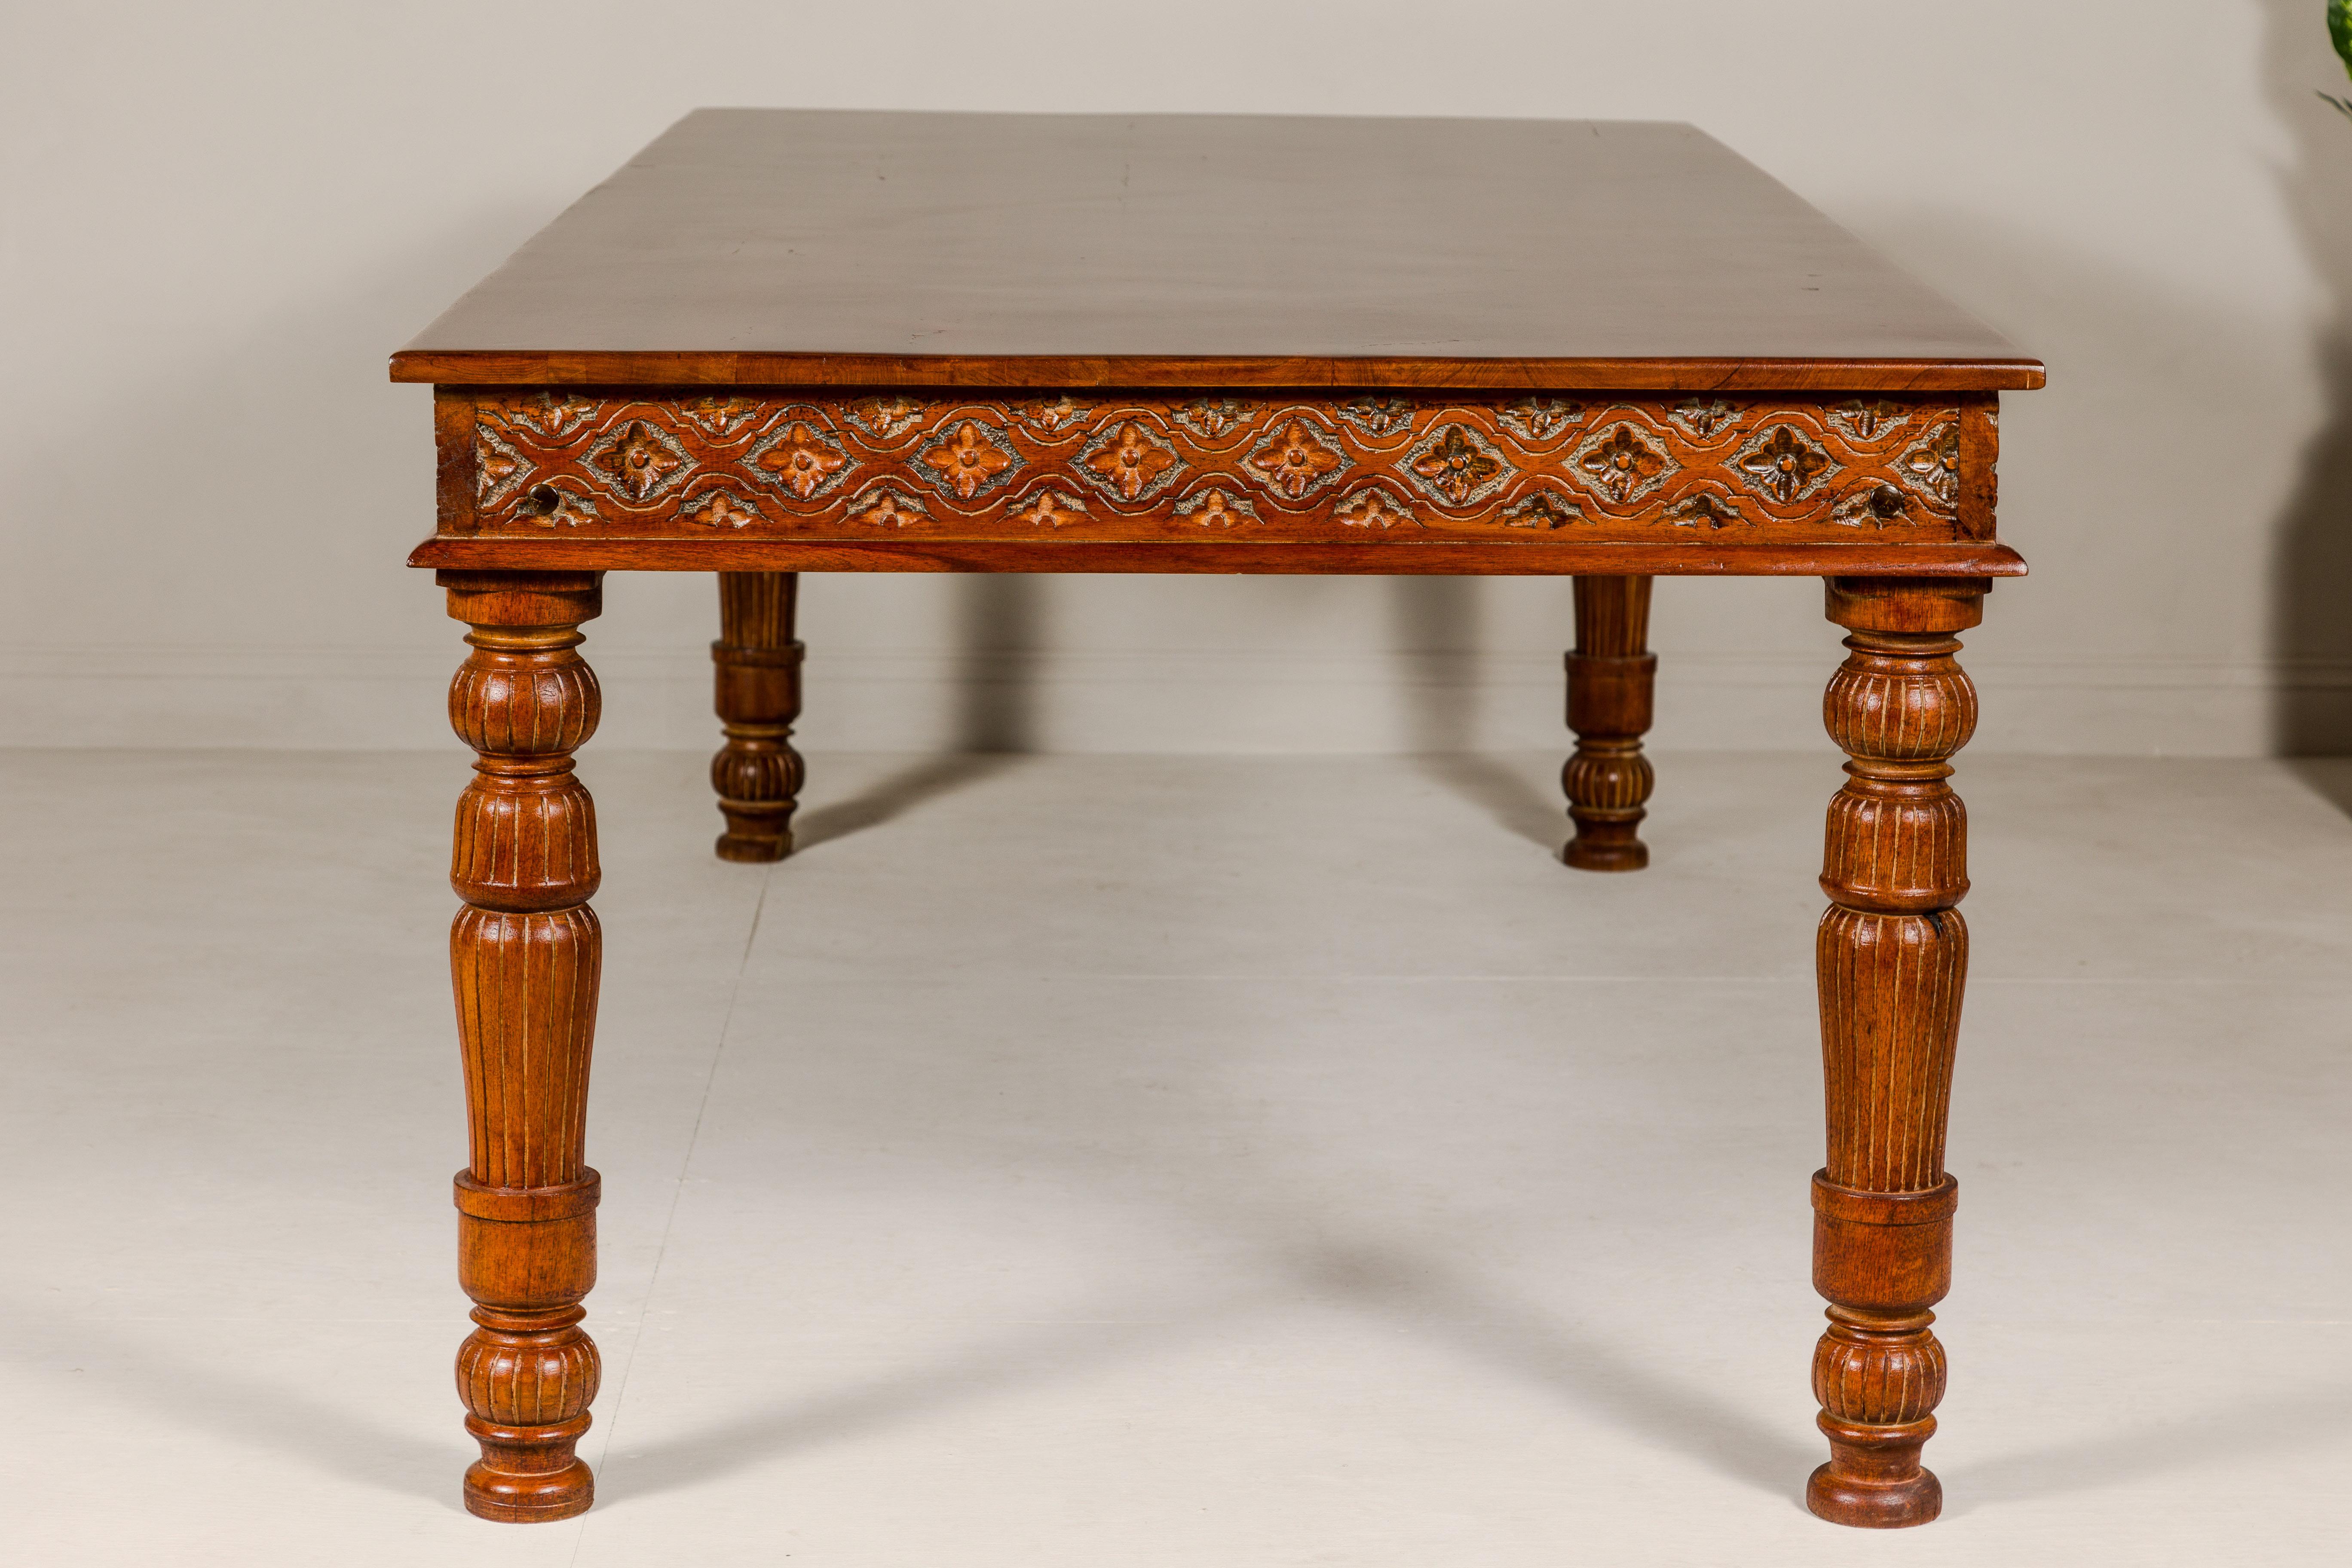 Large Dining Room Table with Carved Apron, Floral Motifs and Turned Legs For Sale 2